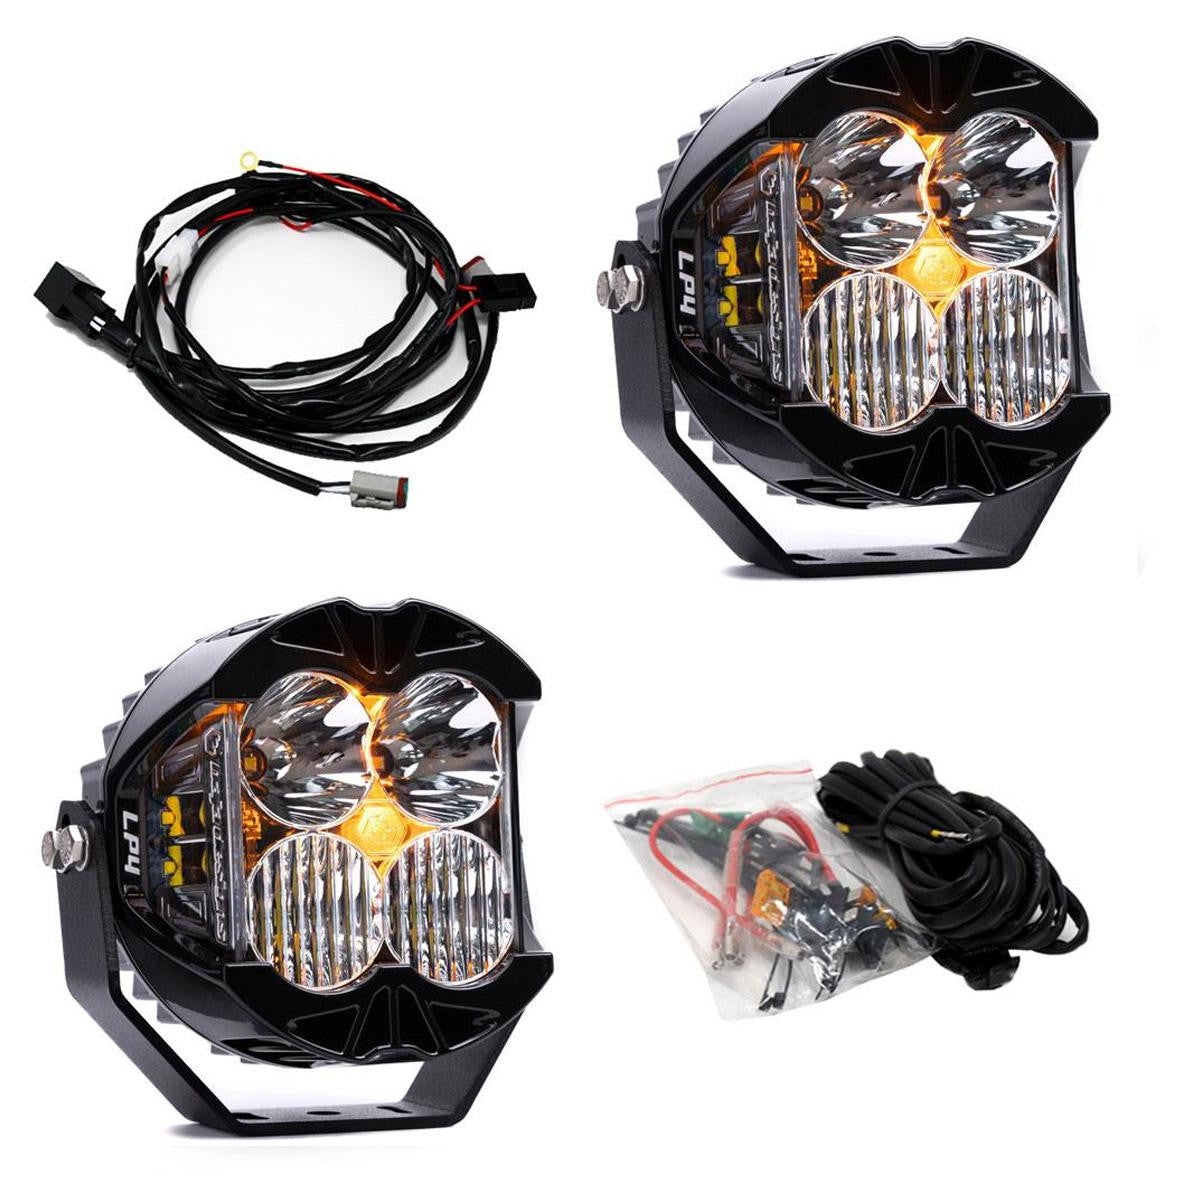 Baja Designs - LP4 Pro LED Auxiliary Light Pod Pair - Universal / Driving Combo + Wiring Harness